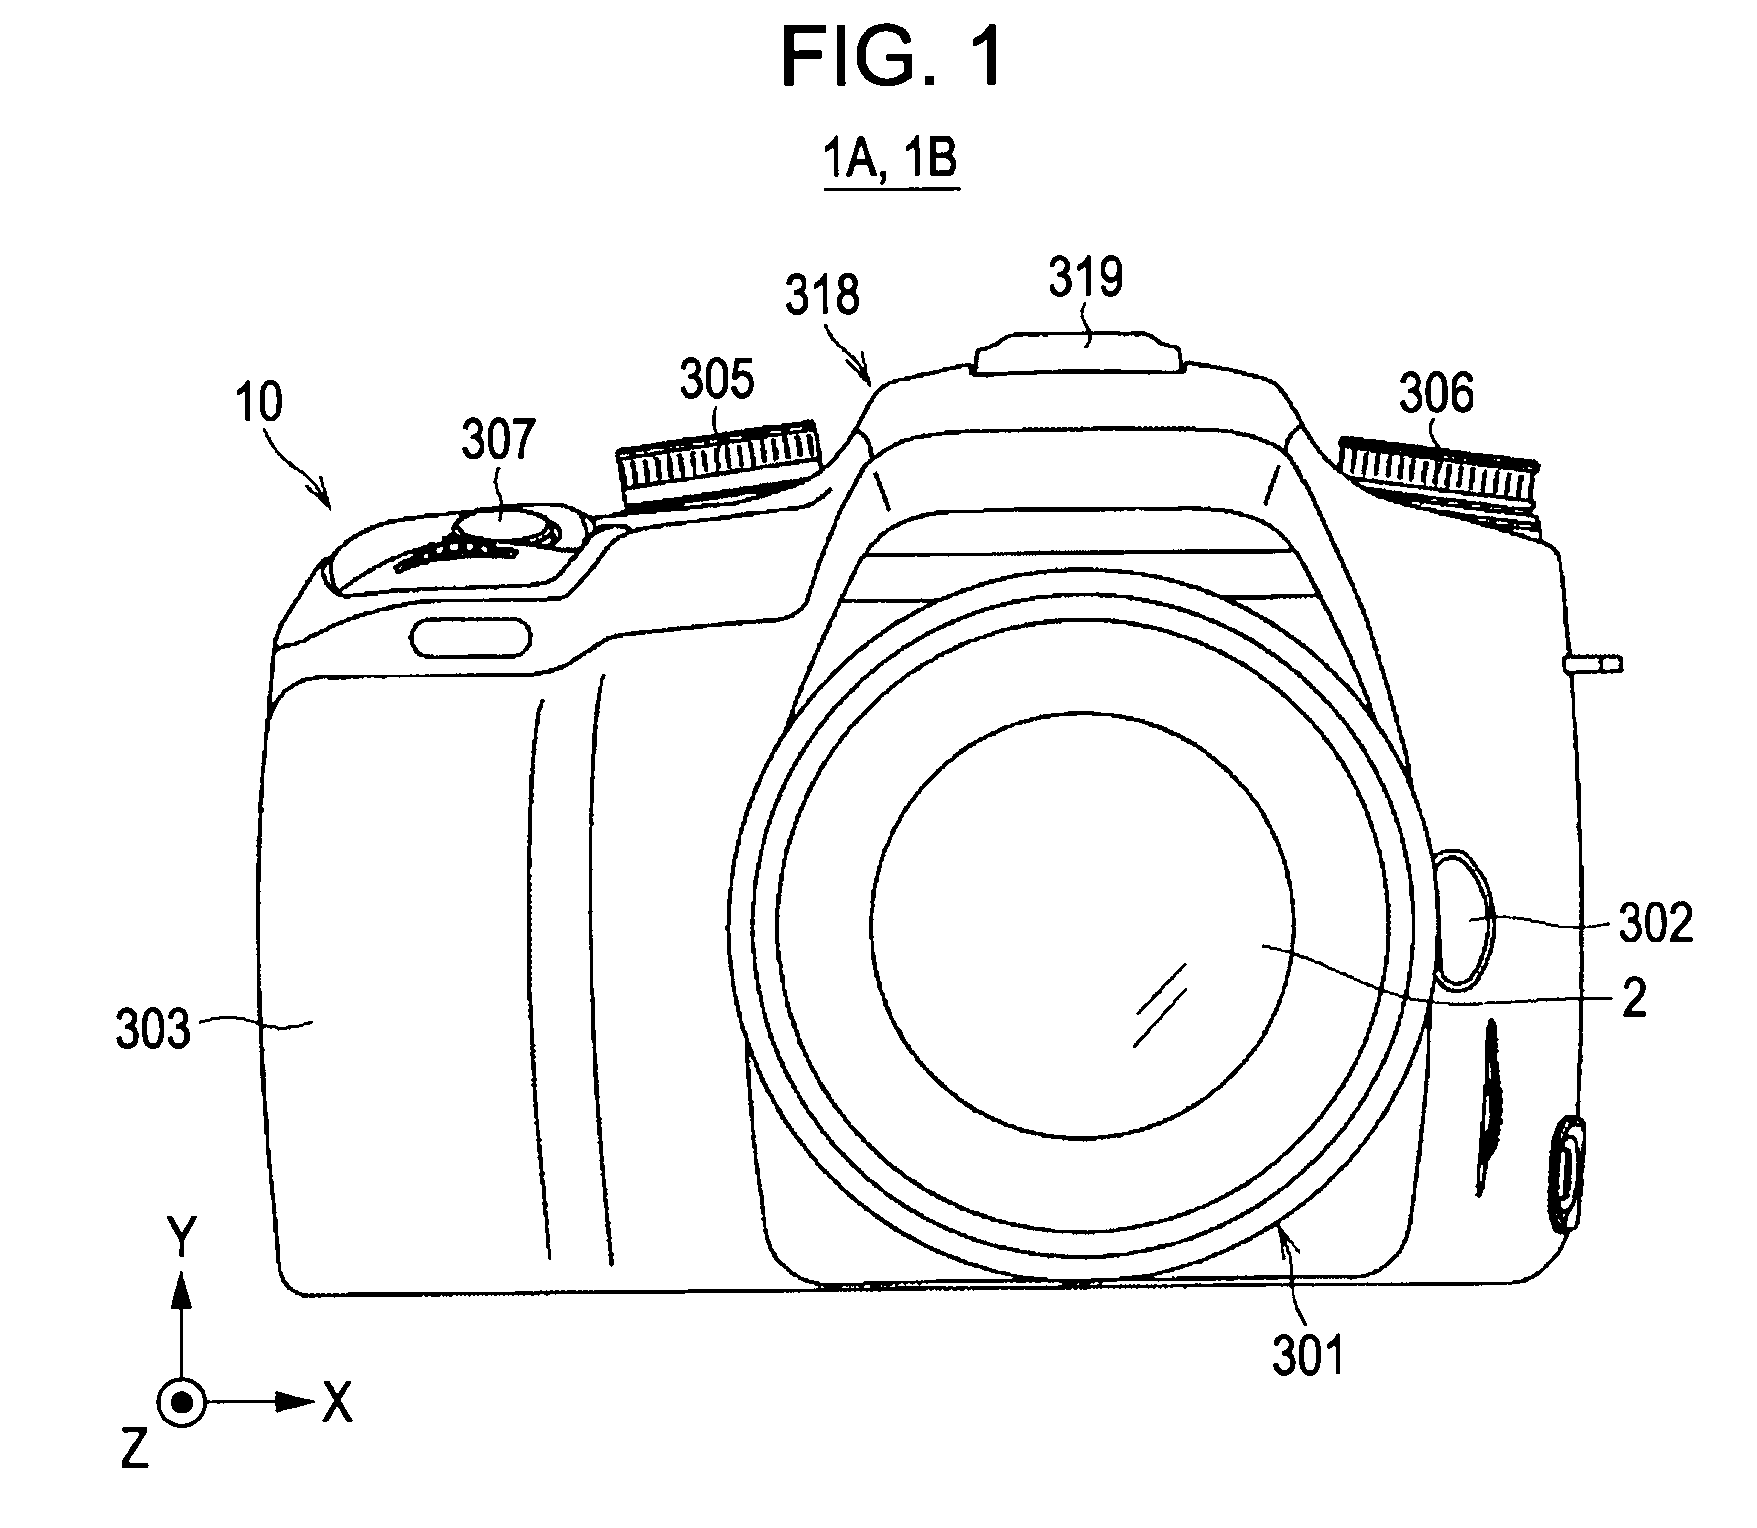 Image-capturing apparatus and image processing method